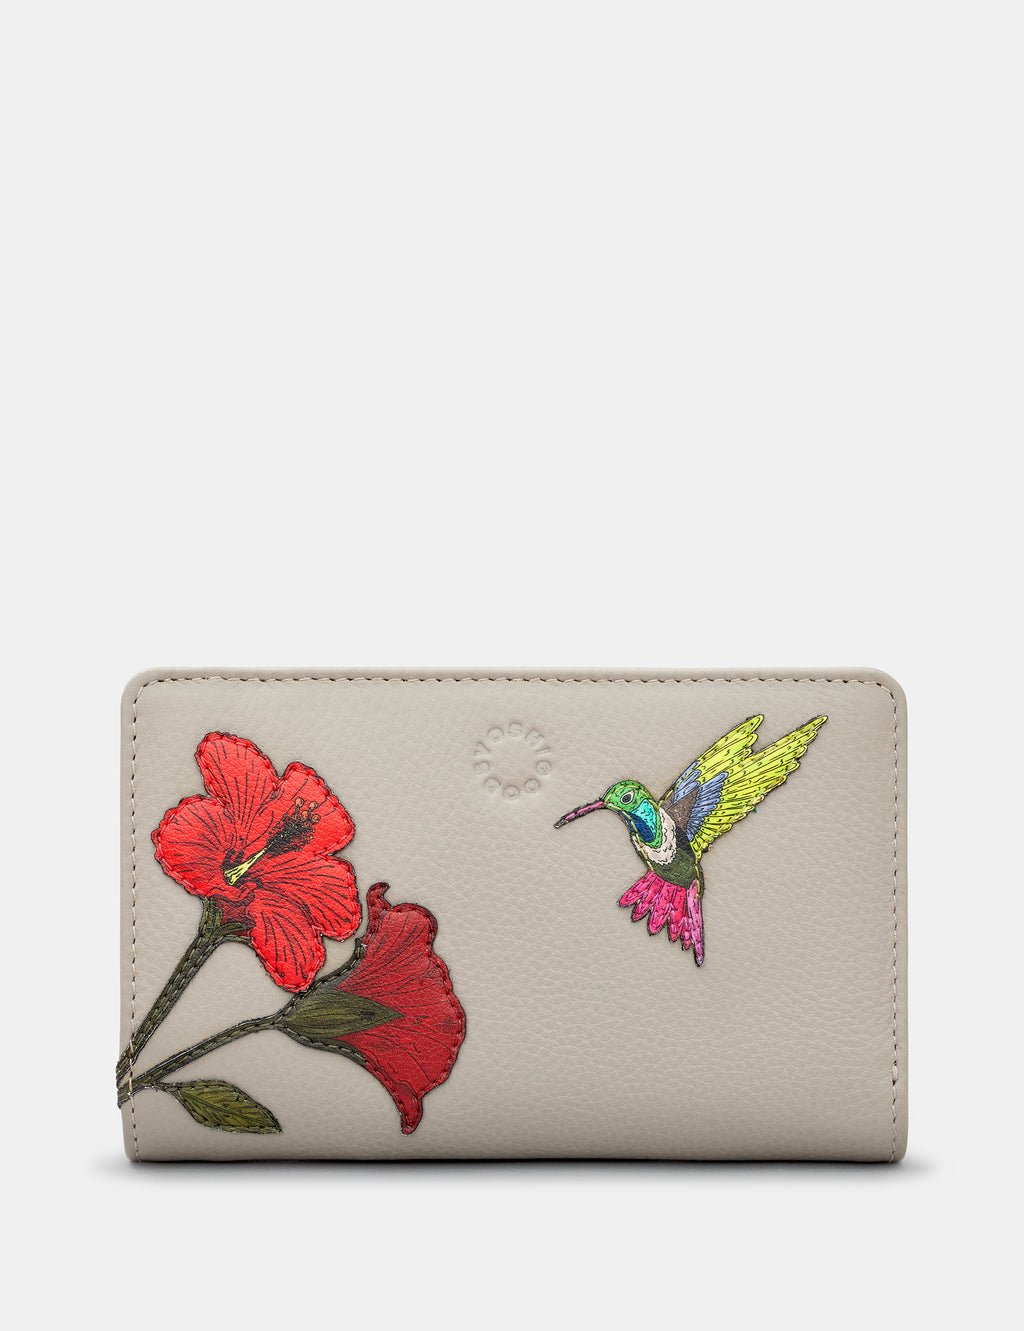 Petal & Feathers Hummingbird Flap Over Zip Round Leather Purse